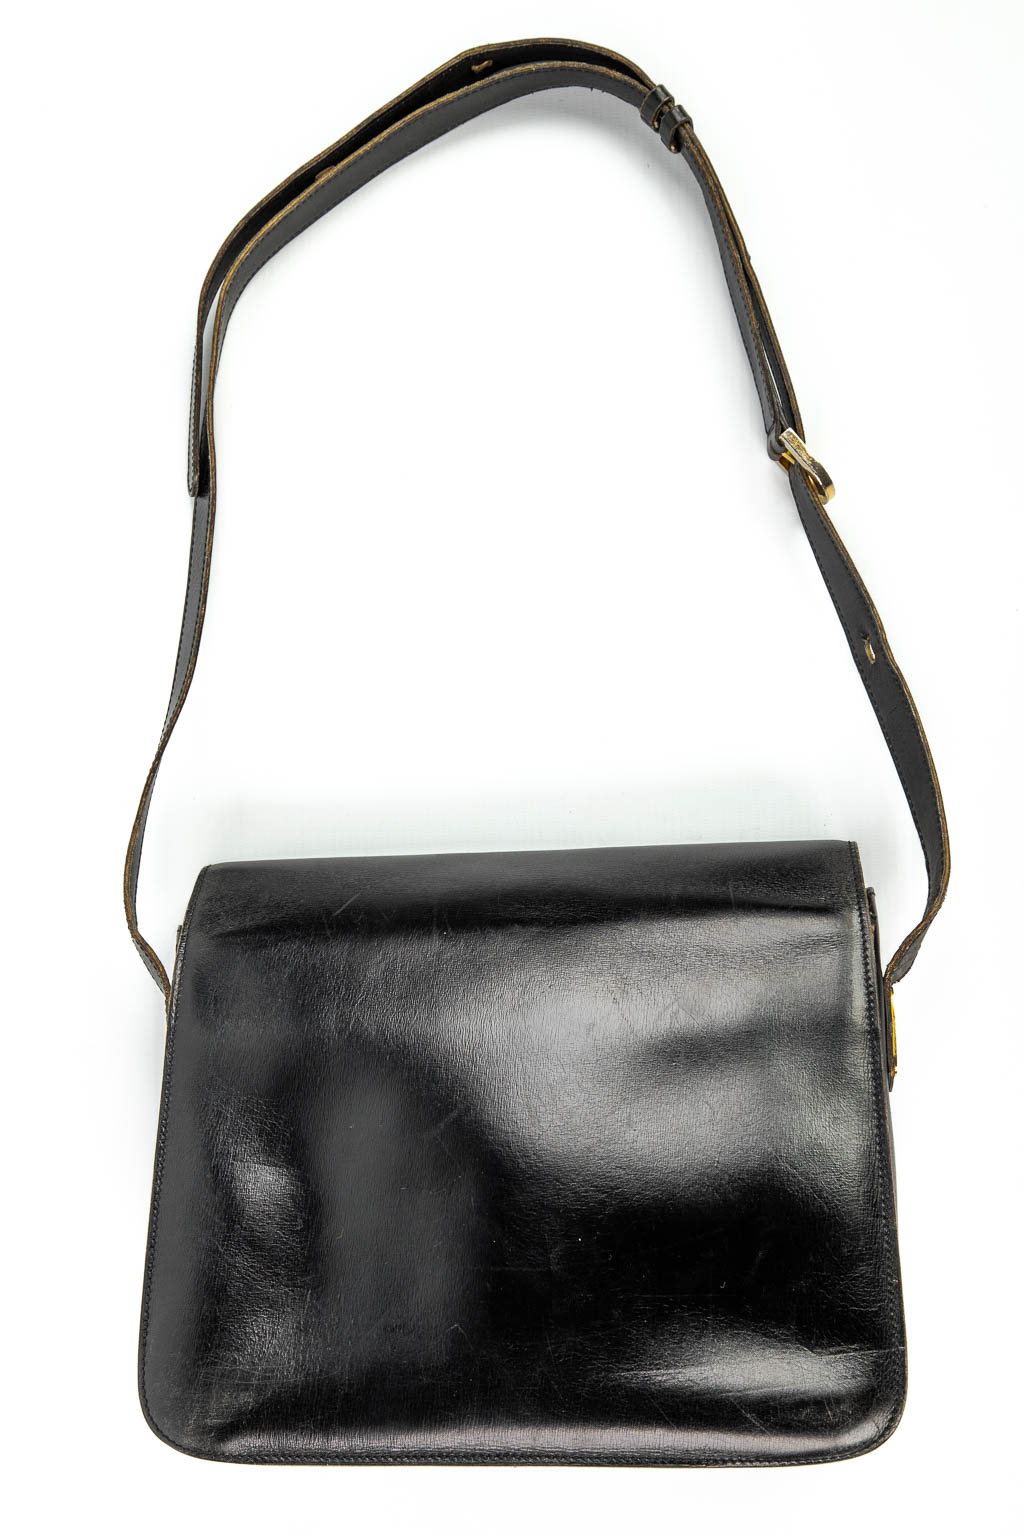 A purse made of black leather and marked Delvaux. (H:21cm)